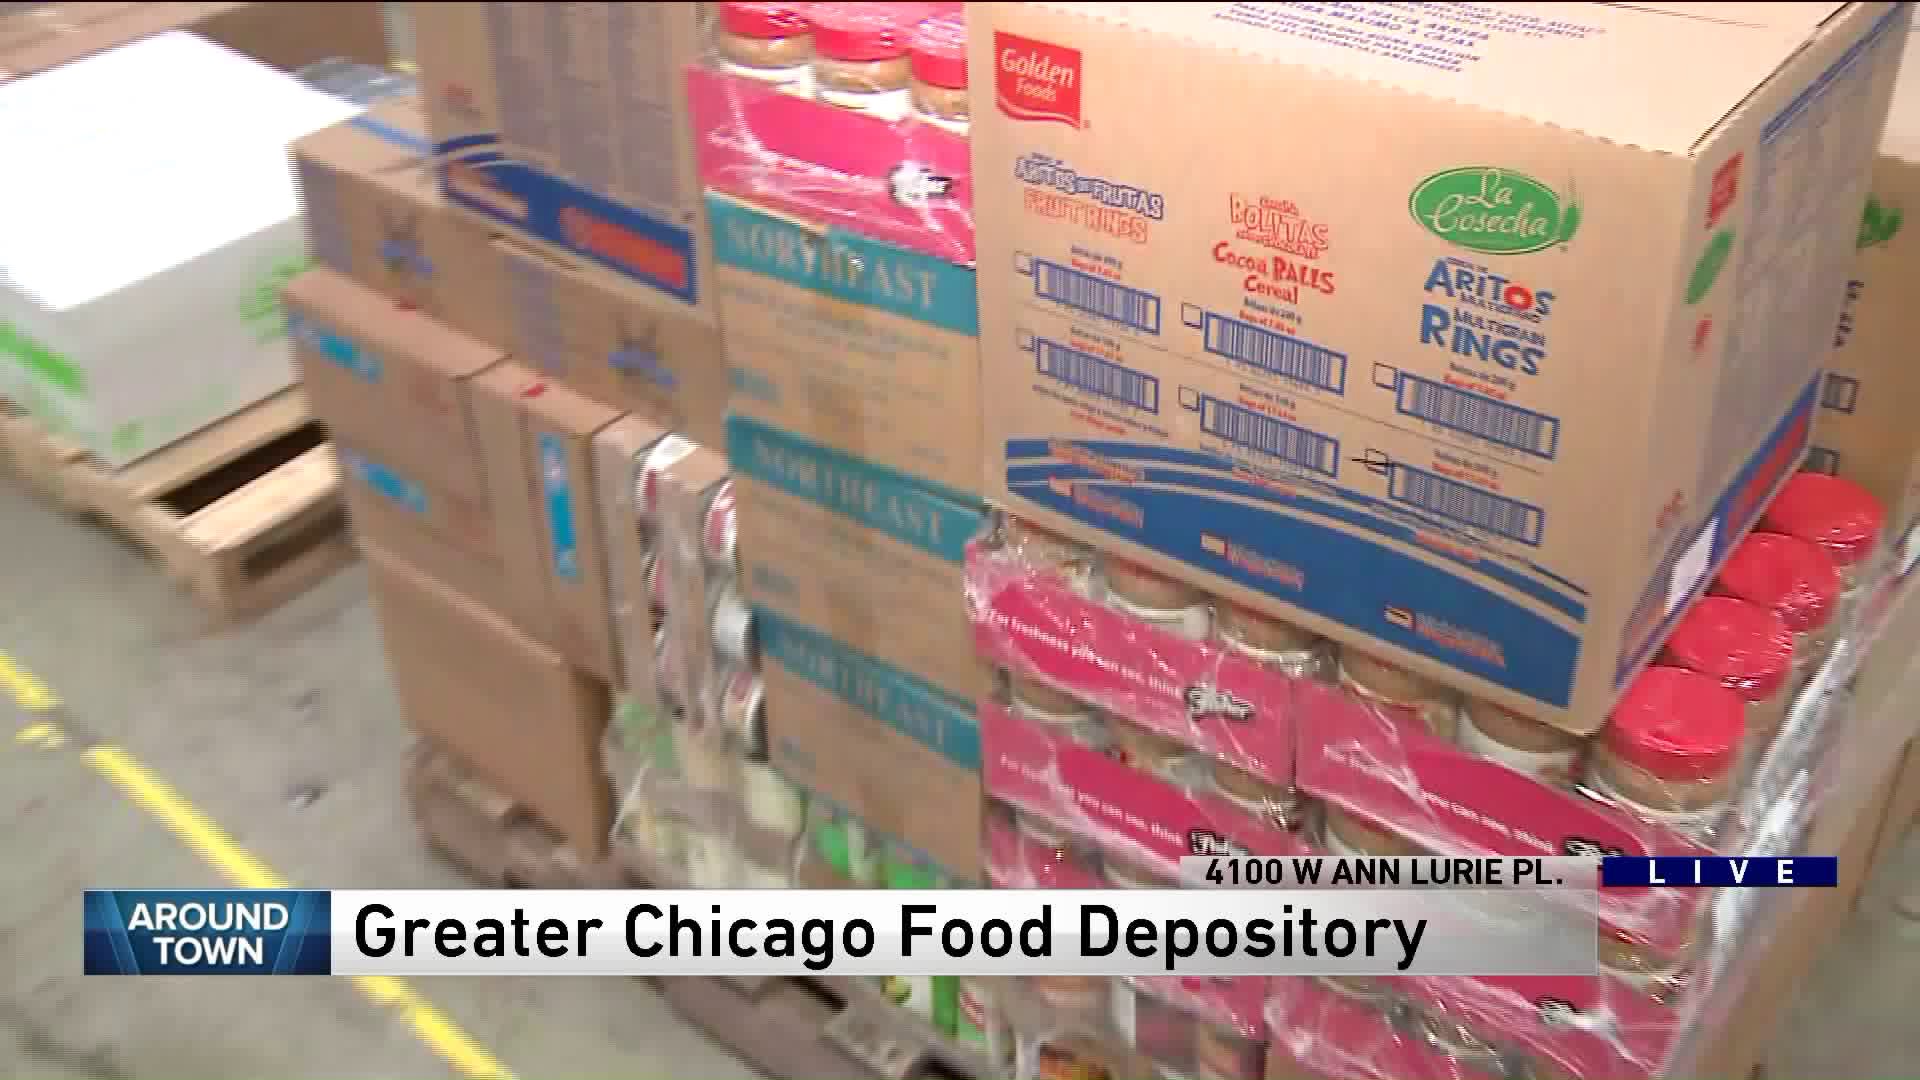 Around Town stops by the Greater Chicago Food Depository ahead of the annual WGN food drive